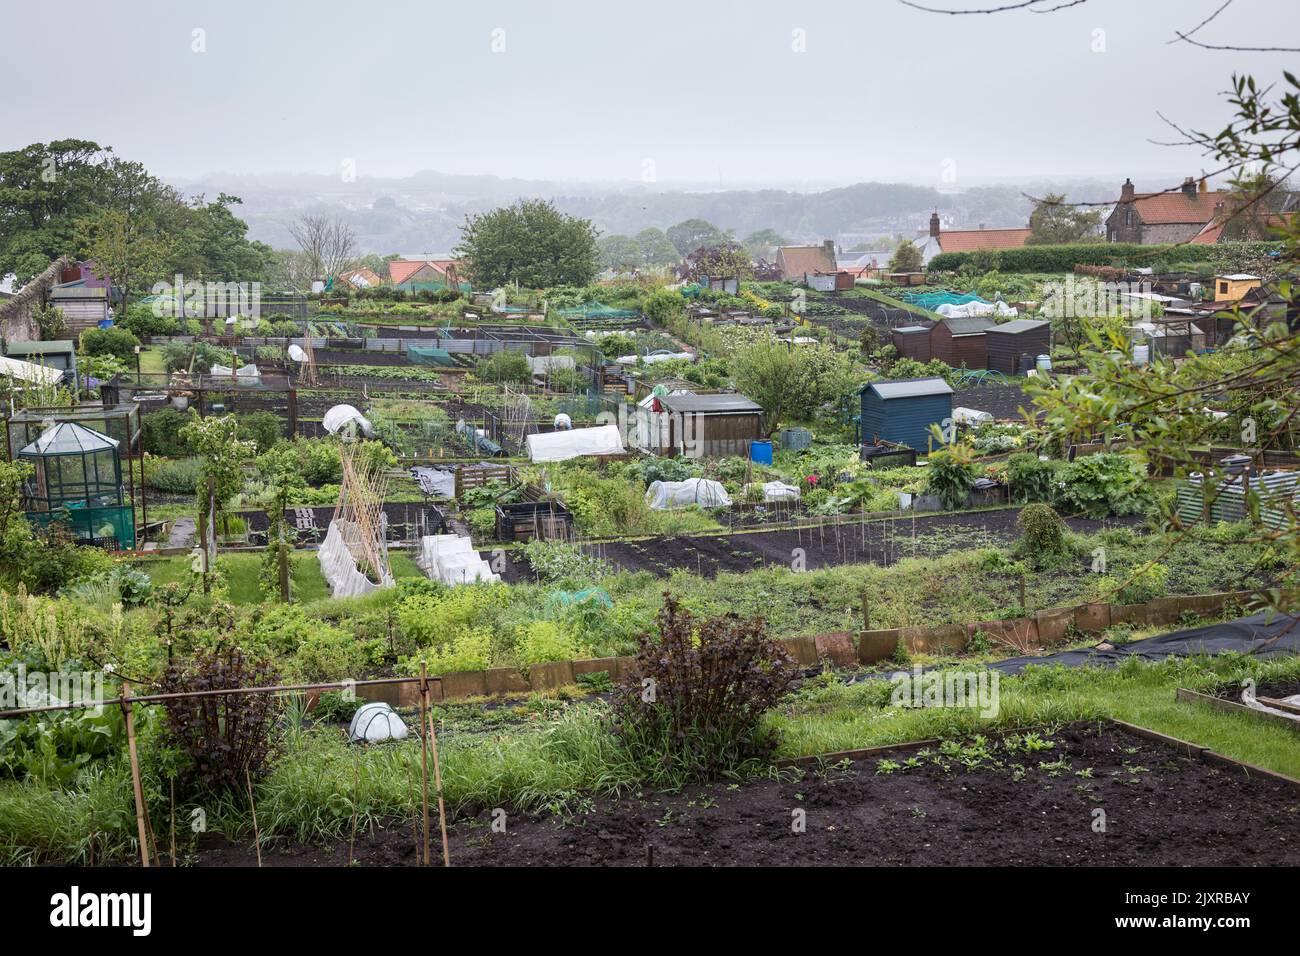 Lions House allotments in Berwick-upon-Tweed, England. Stock Photo